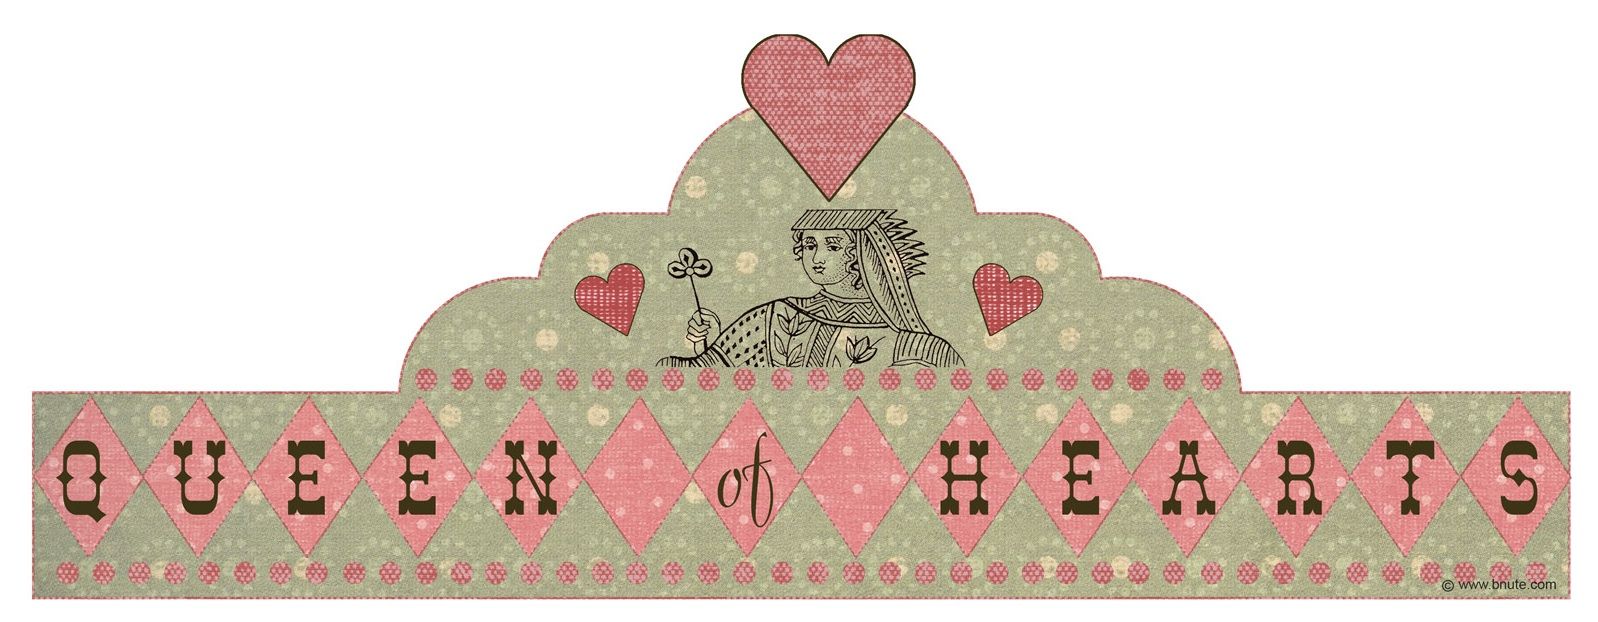 Queen of Hearts crown tea party printable at B. Nute | Cool Mom Picks